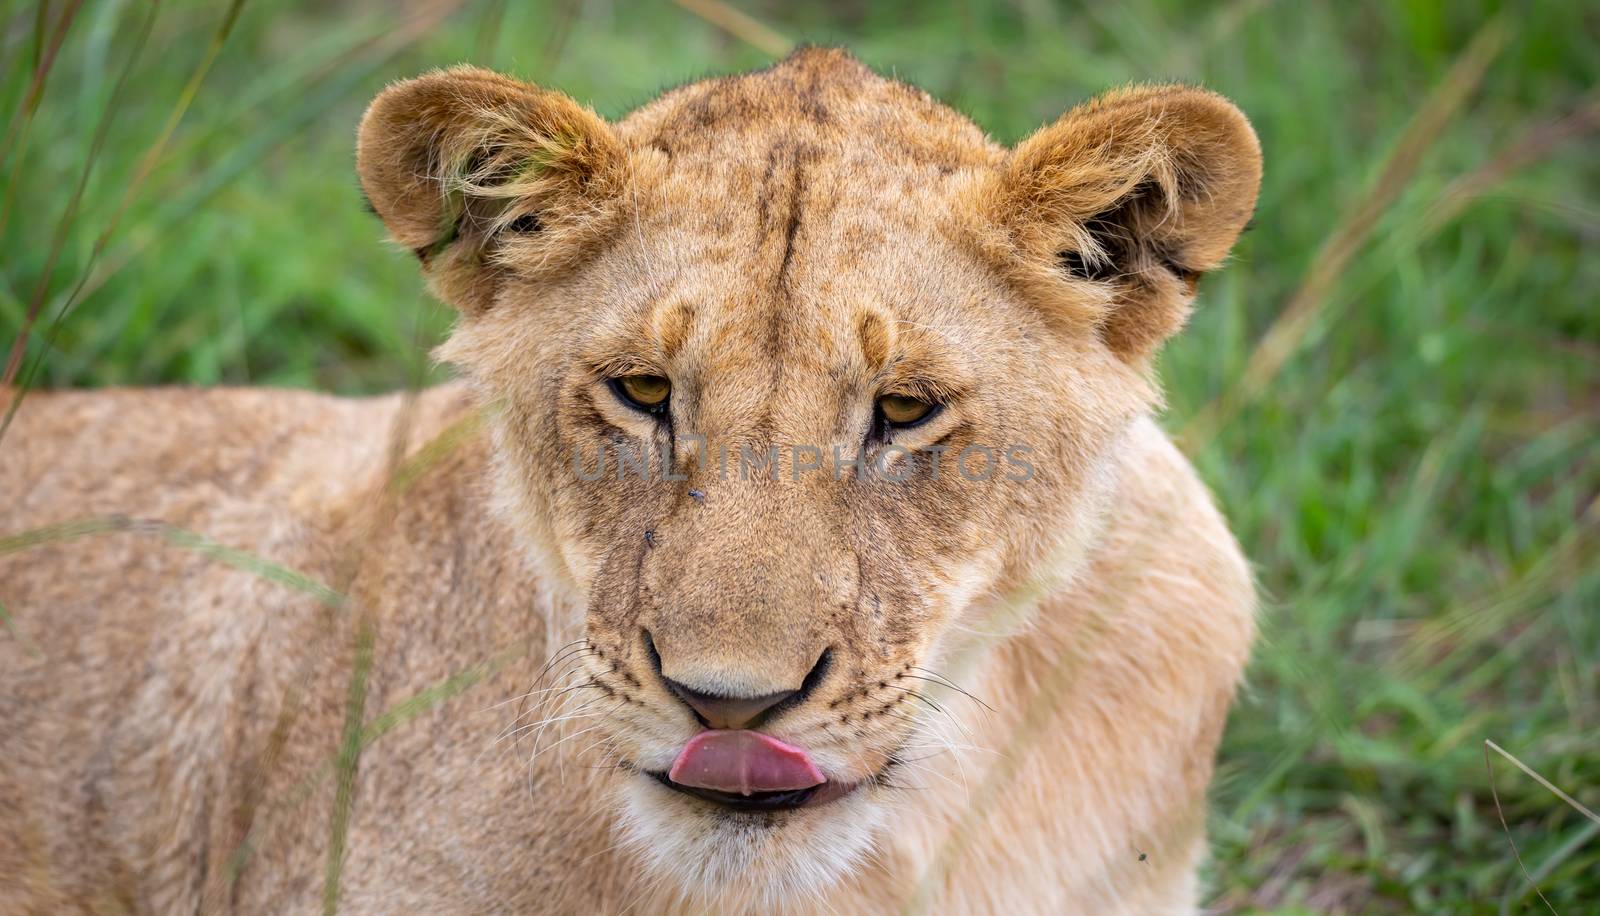 A face of a young lioness in close-up